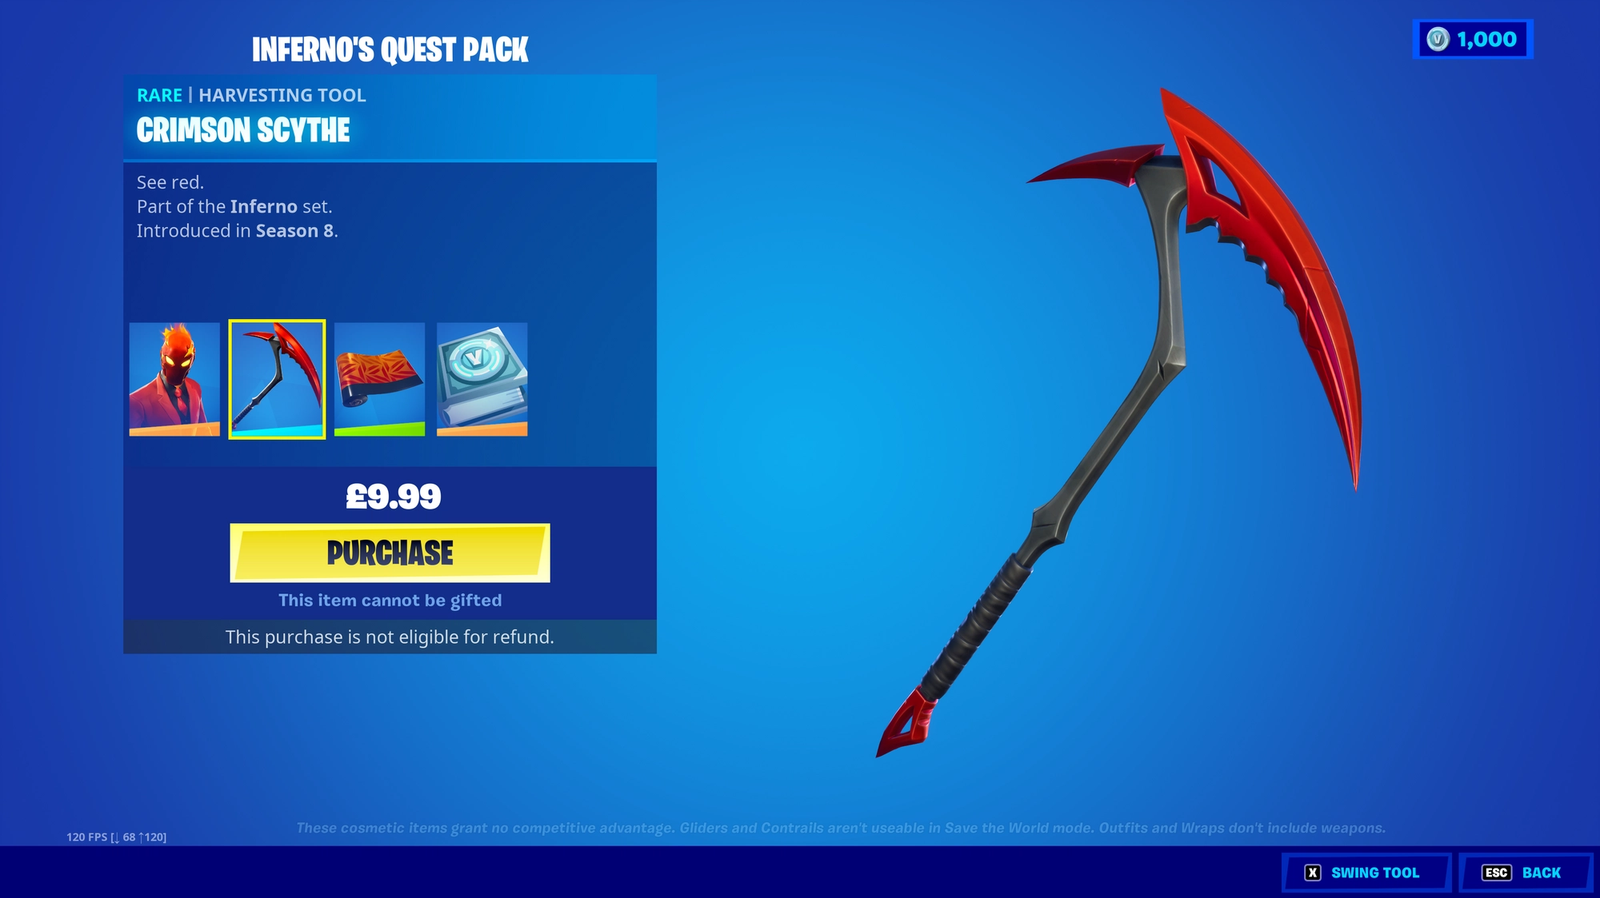 What is the pickaxe found in the Inferno's Quest Pack